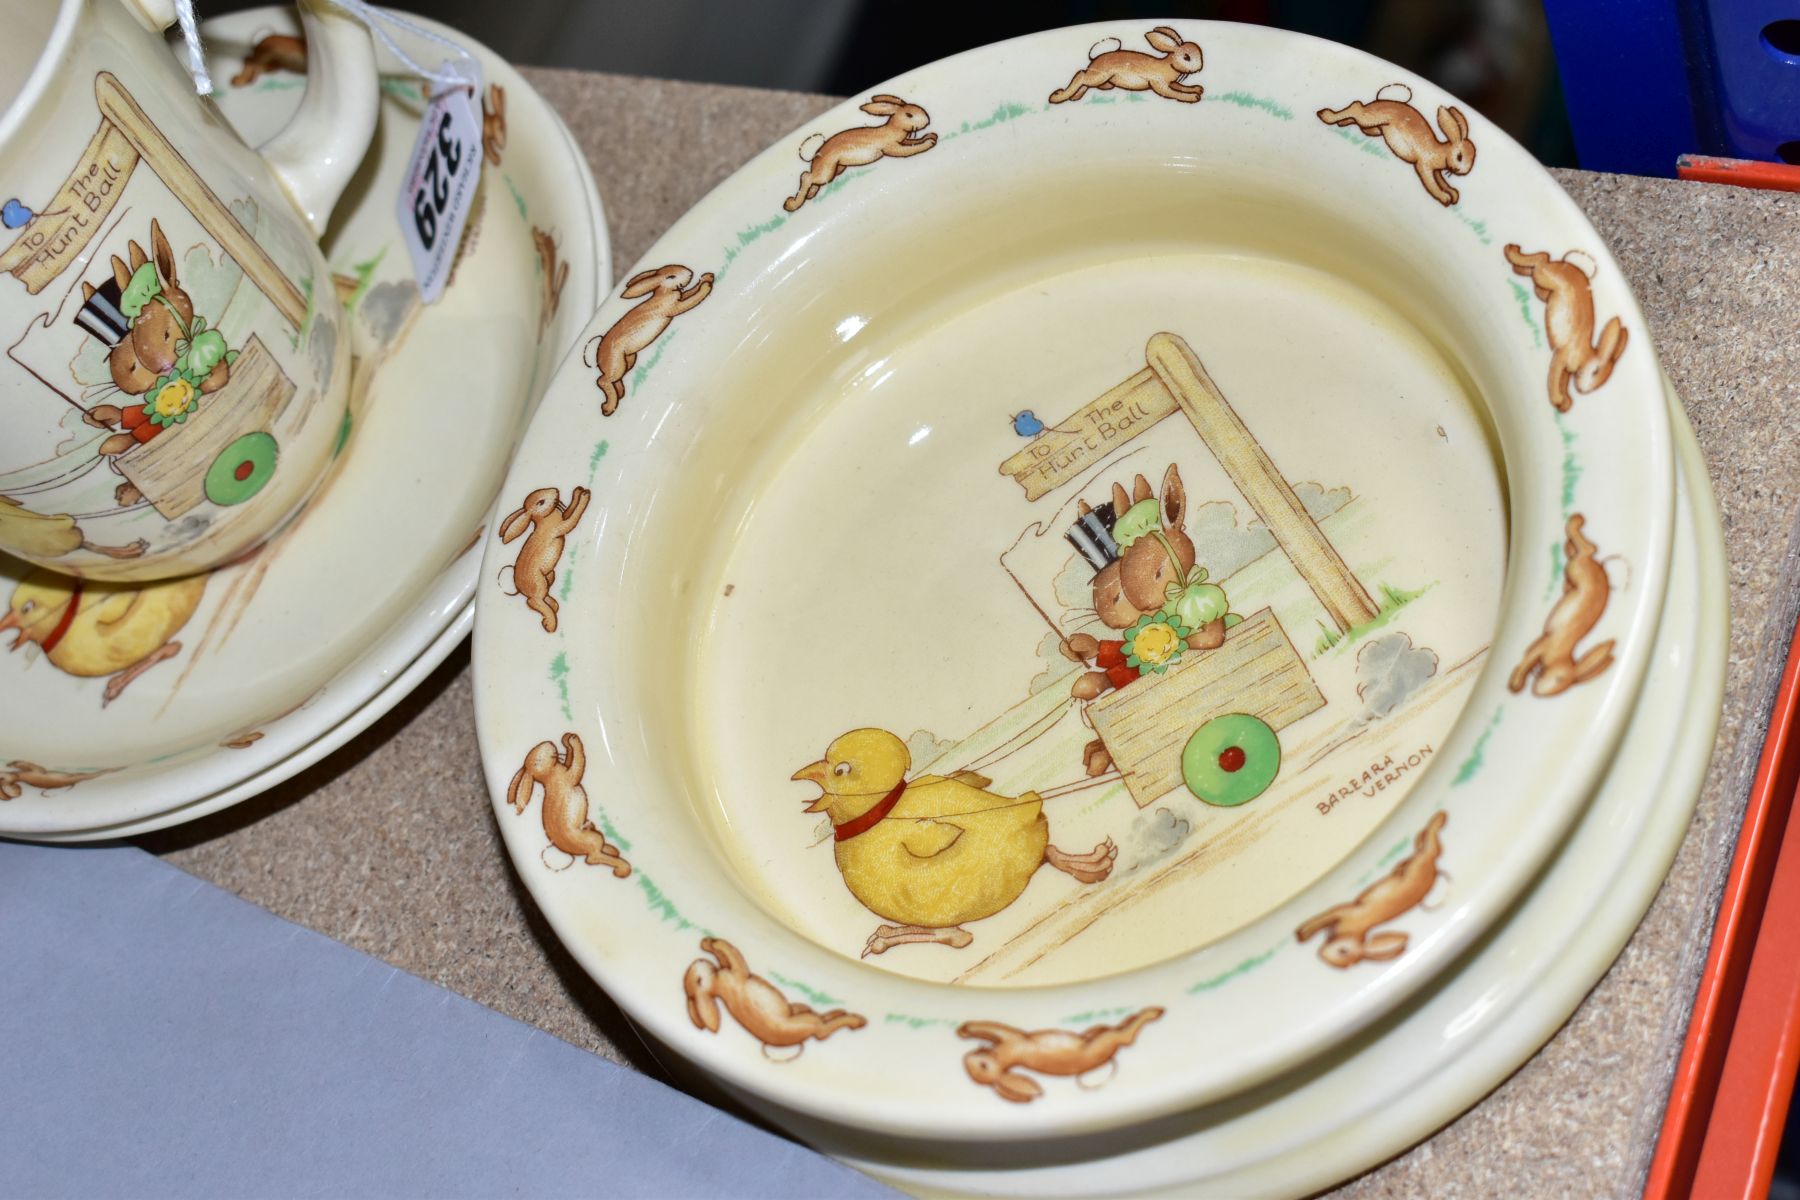 SIX PIECES OF ROYAL DOULTON BUNNYKINS EARTHENWARE TABLES WARES OF CHICKEN PULLING CART, DESIGNED - Image 8 of 10